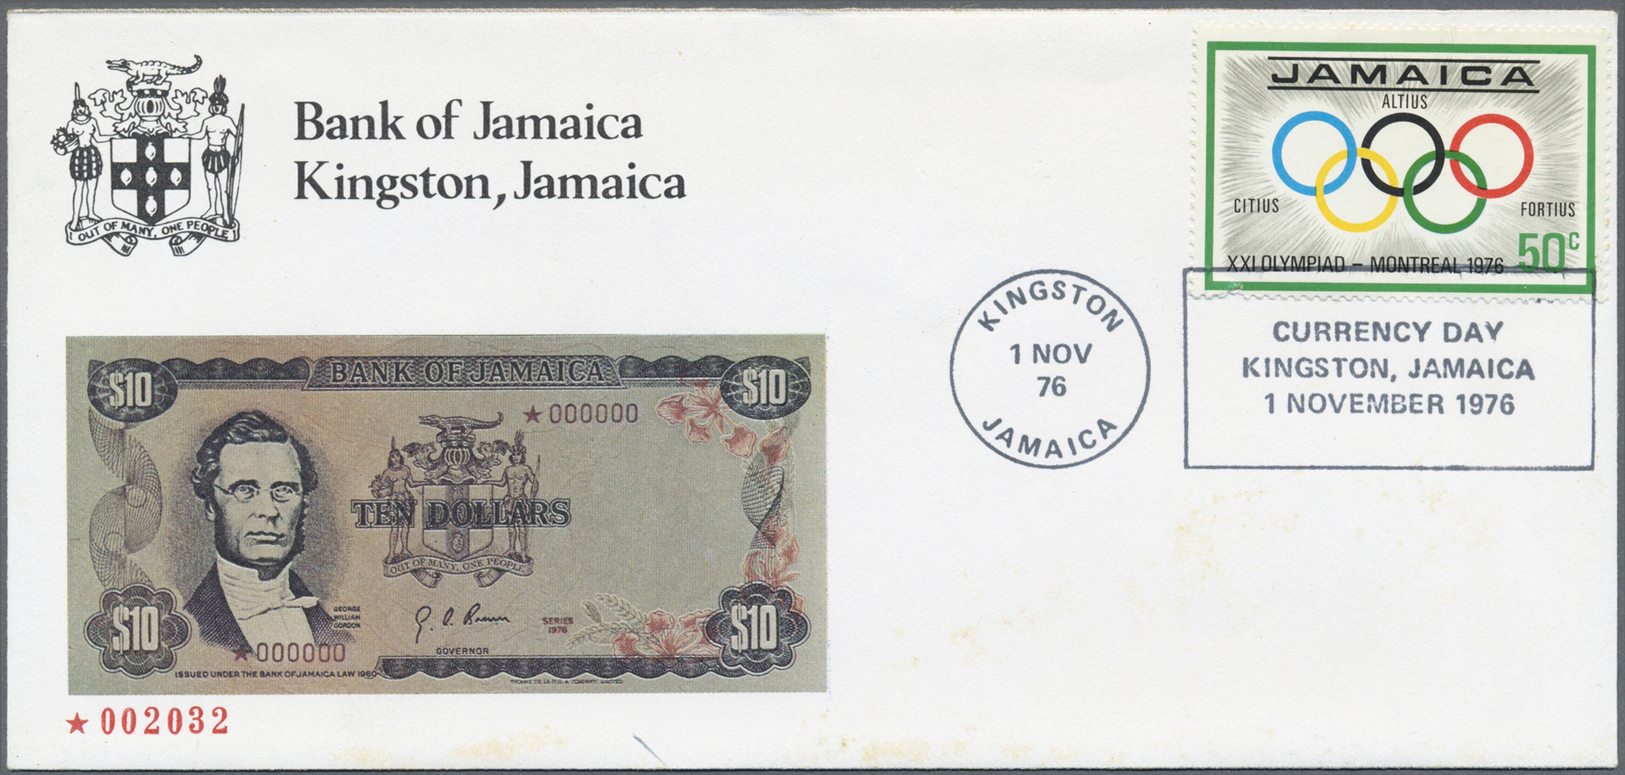 01299 Jamaica: Offical First Day Cover Album of the Bank of Jamaica, with certificate, containing 4 First Day Covers wit